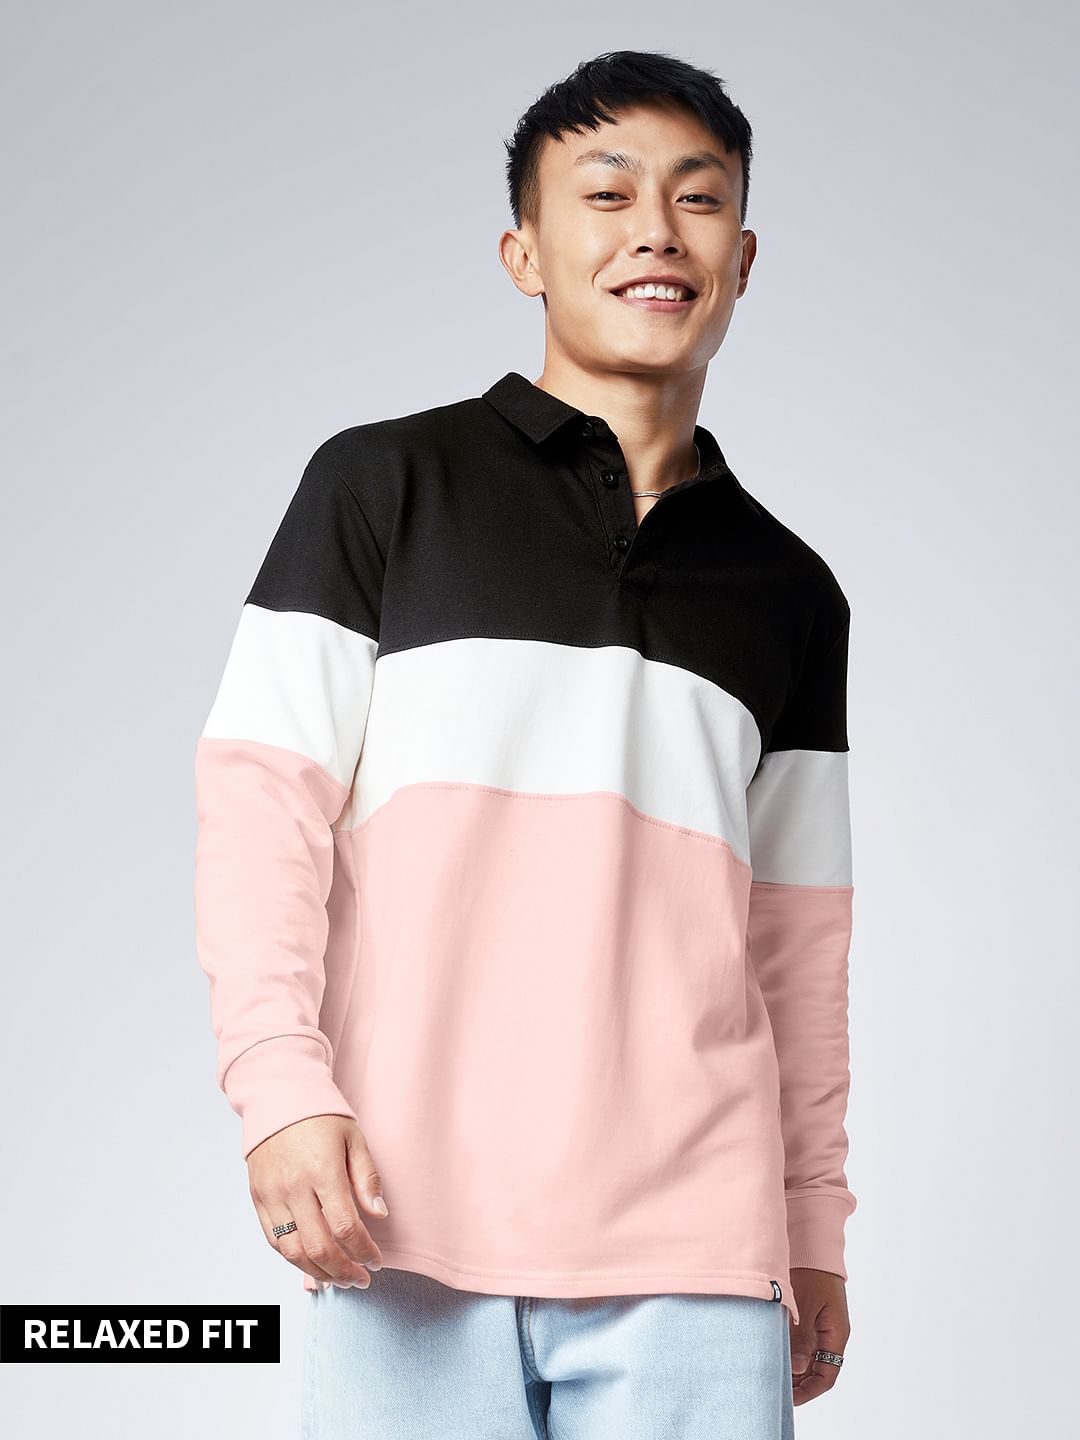 Nude Pink & Black: Men's Colorblock Rugby Polo